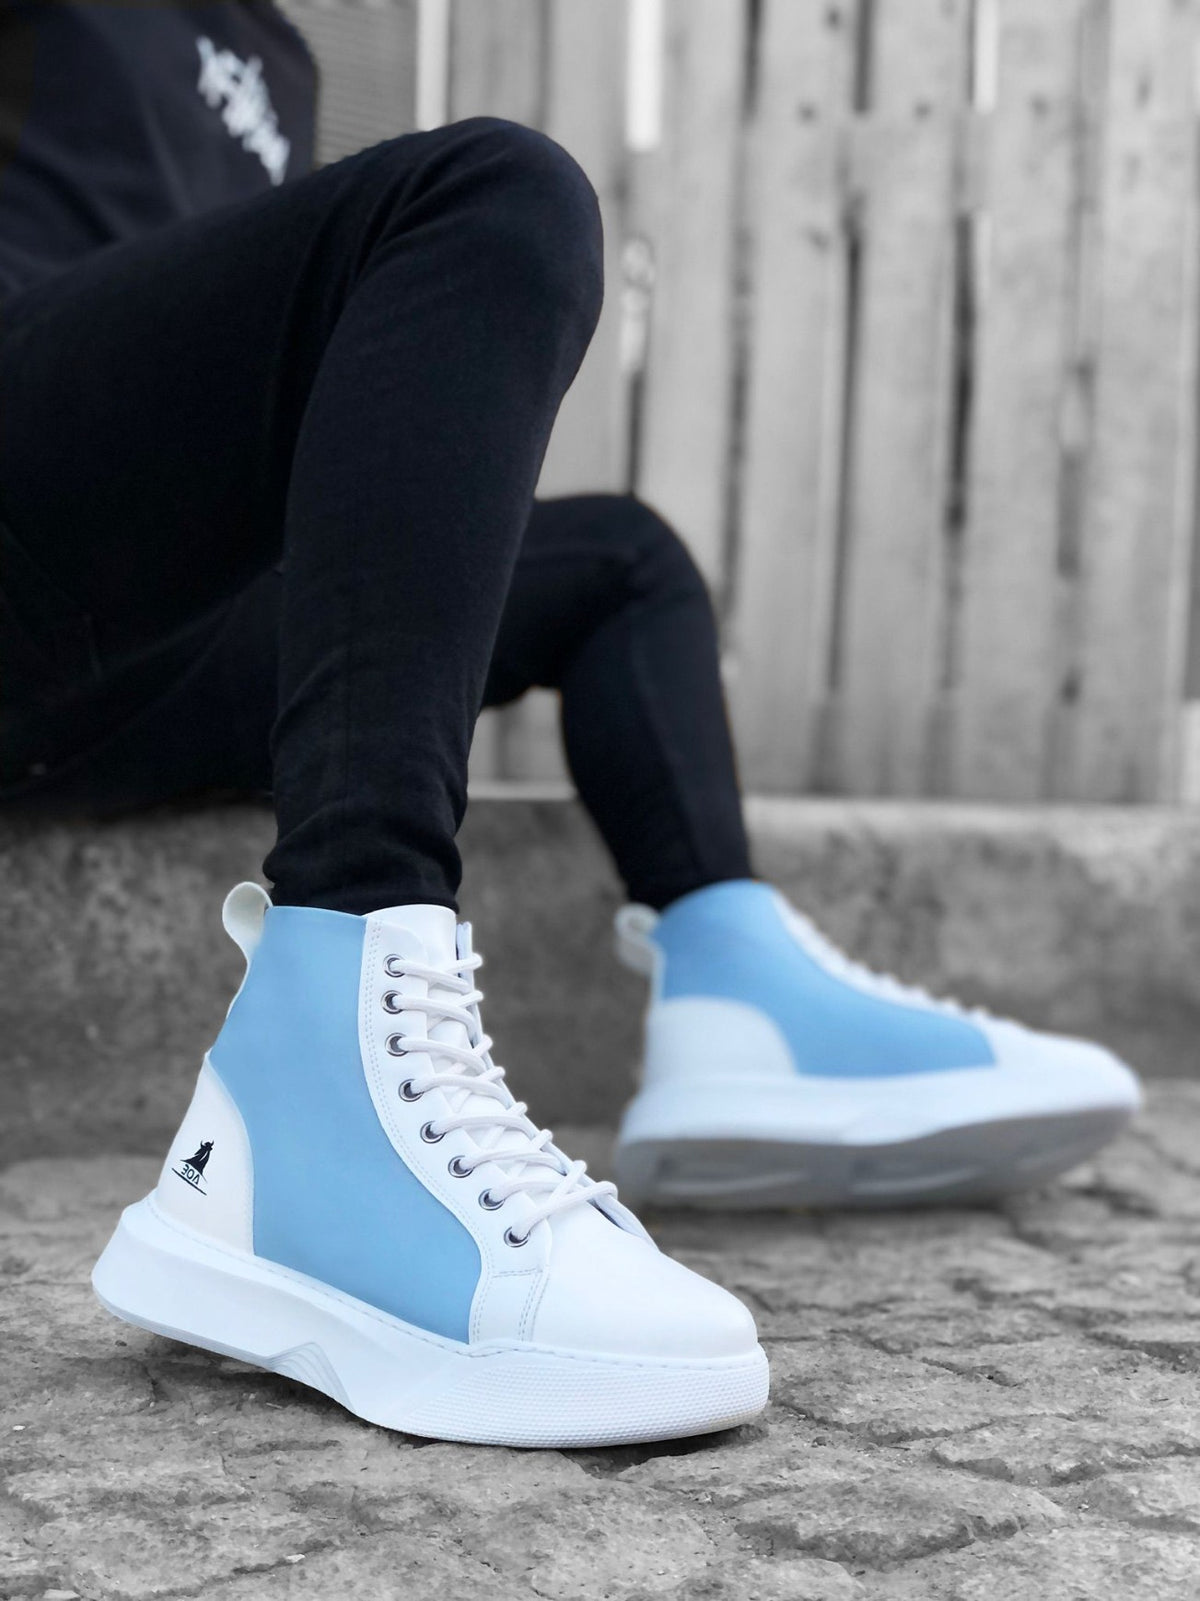 BA0256 Lace-up Men's High Sole White Blue Sole Sports Boots - STREETMODE ™